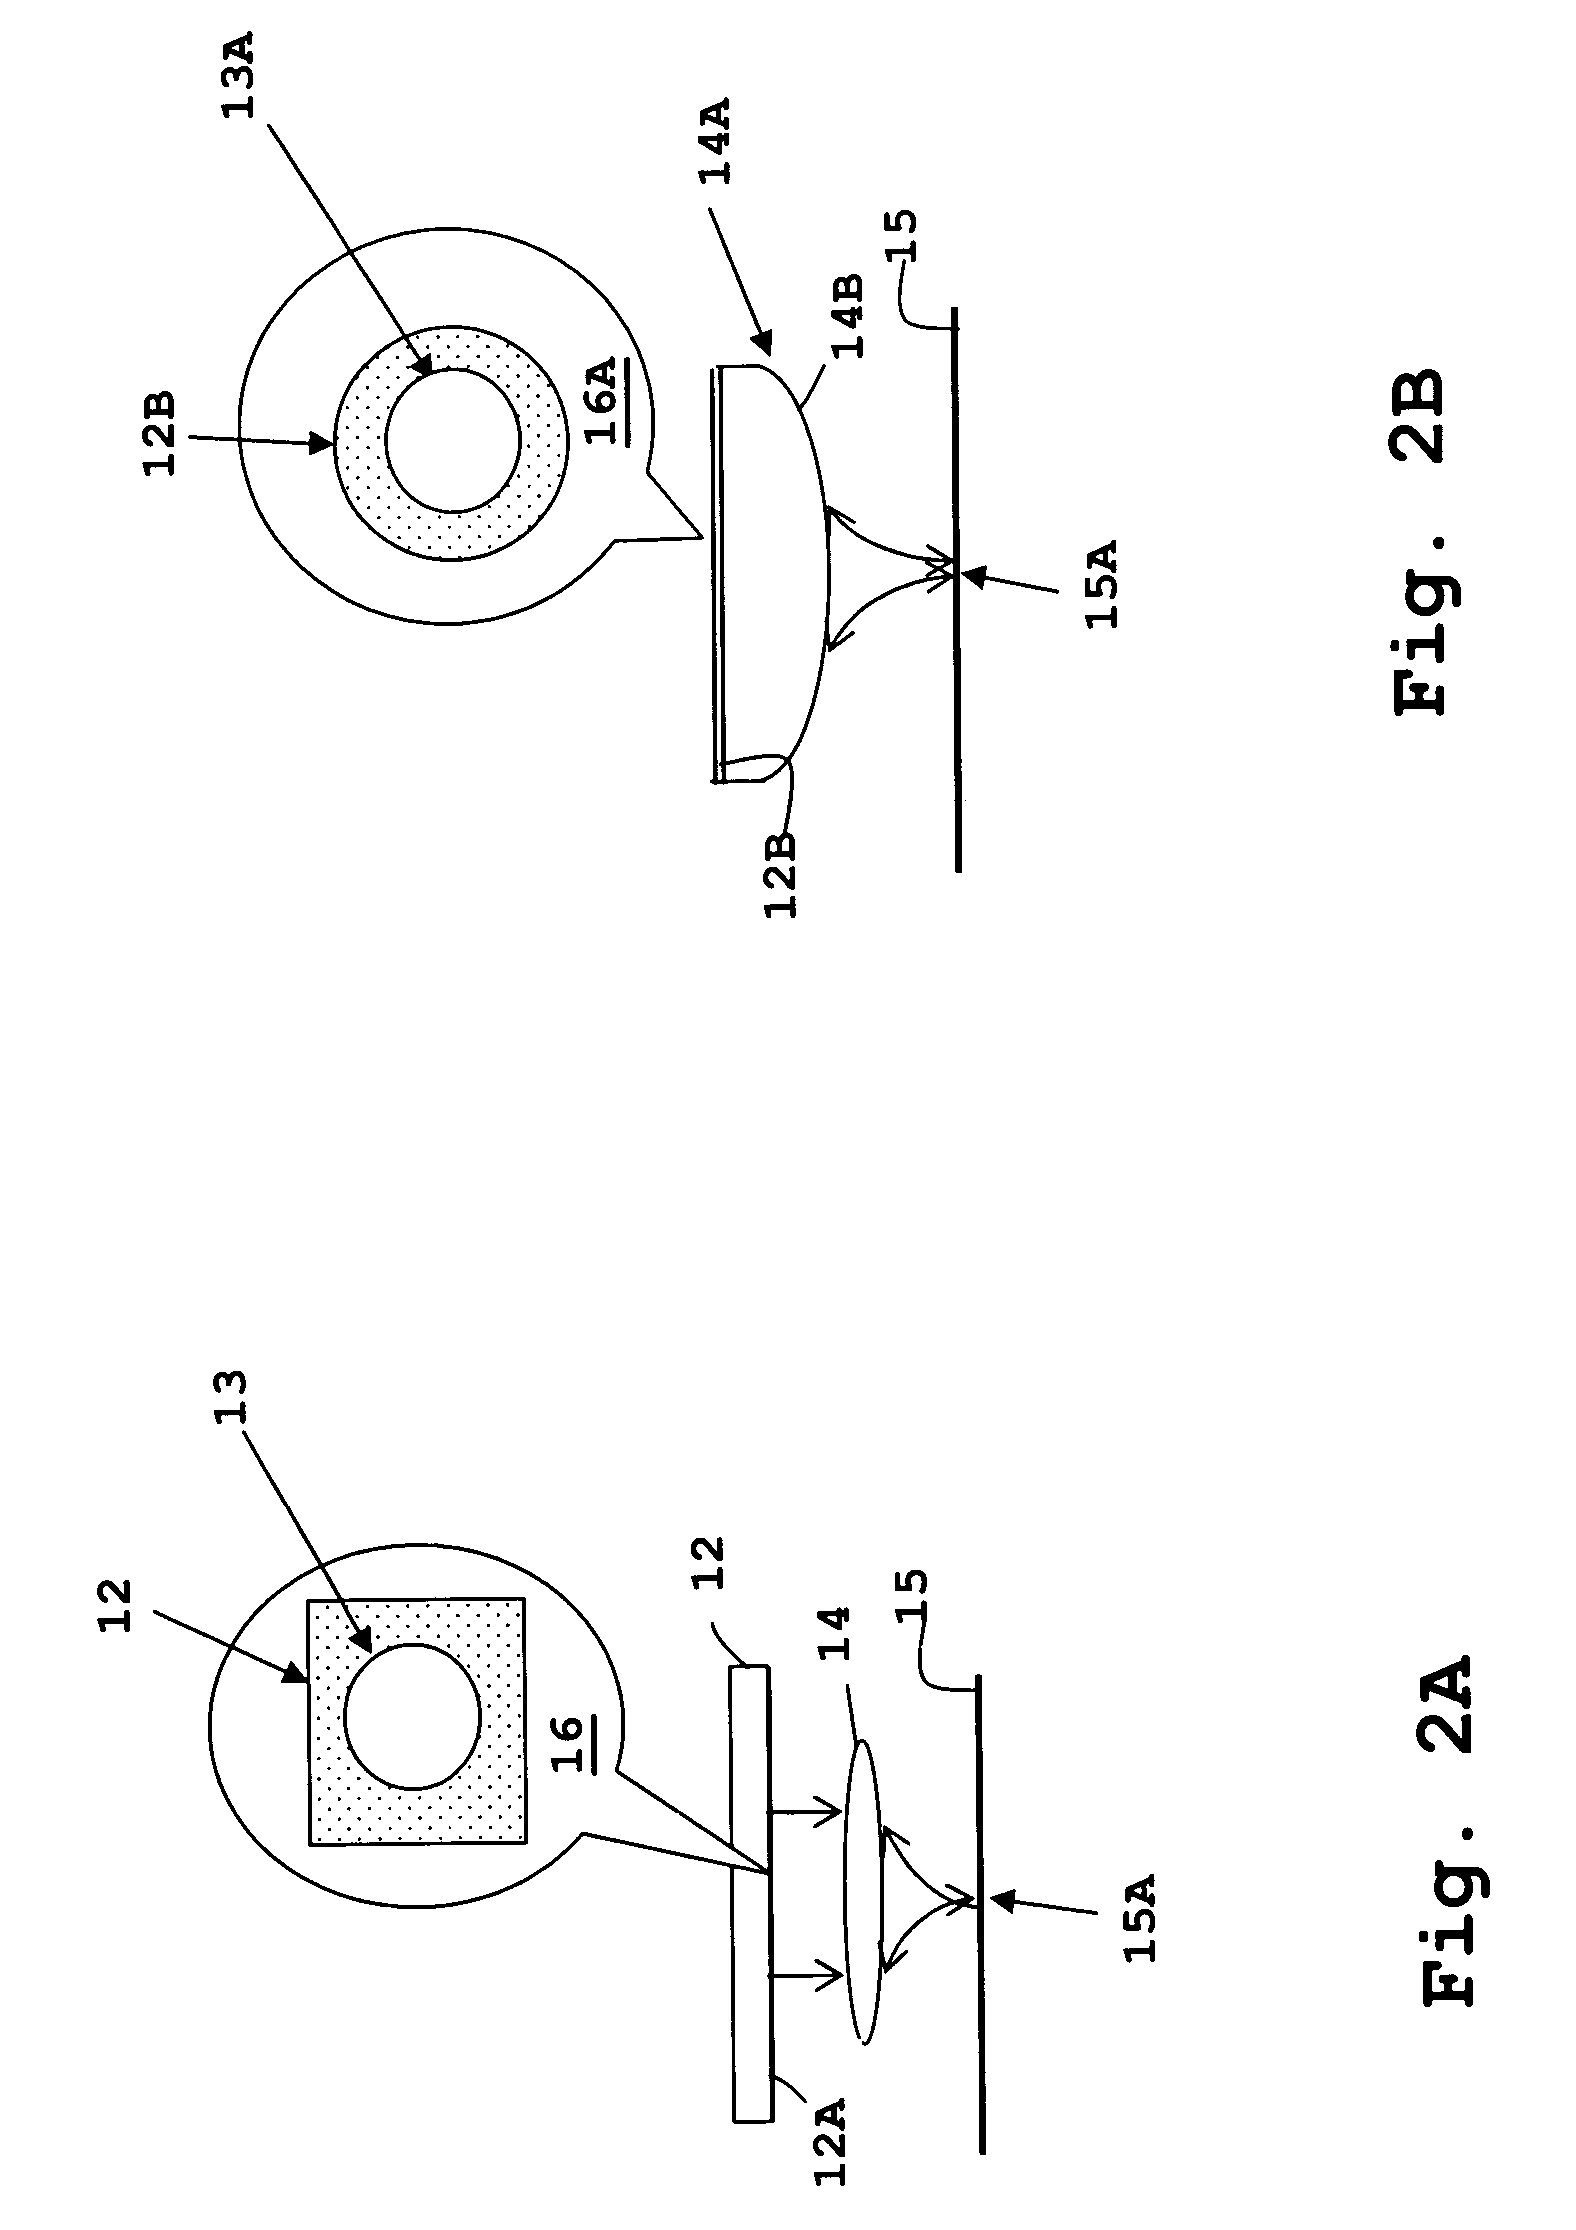 Method and apparatus including in-resonator imaging lens for improving resolution of a resonator-enhanced optical system